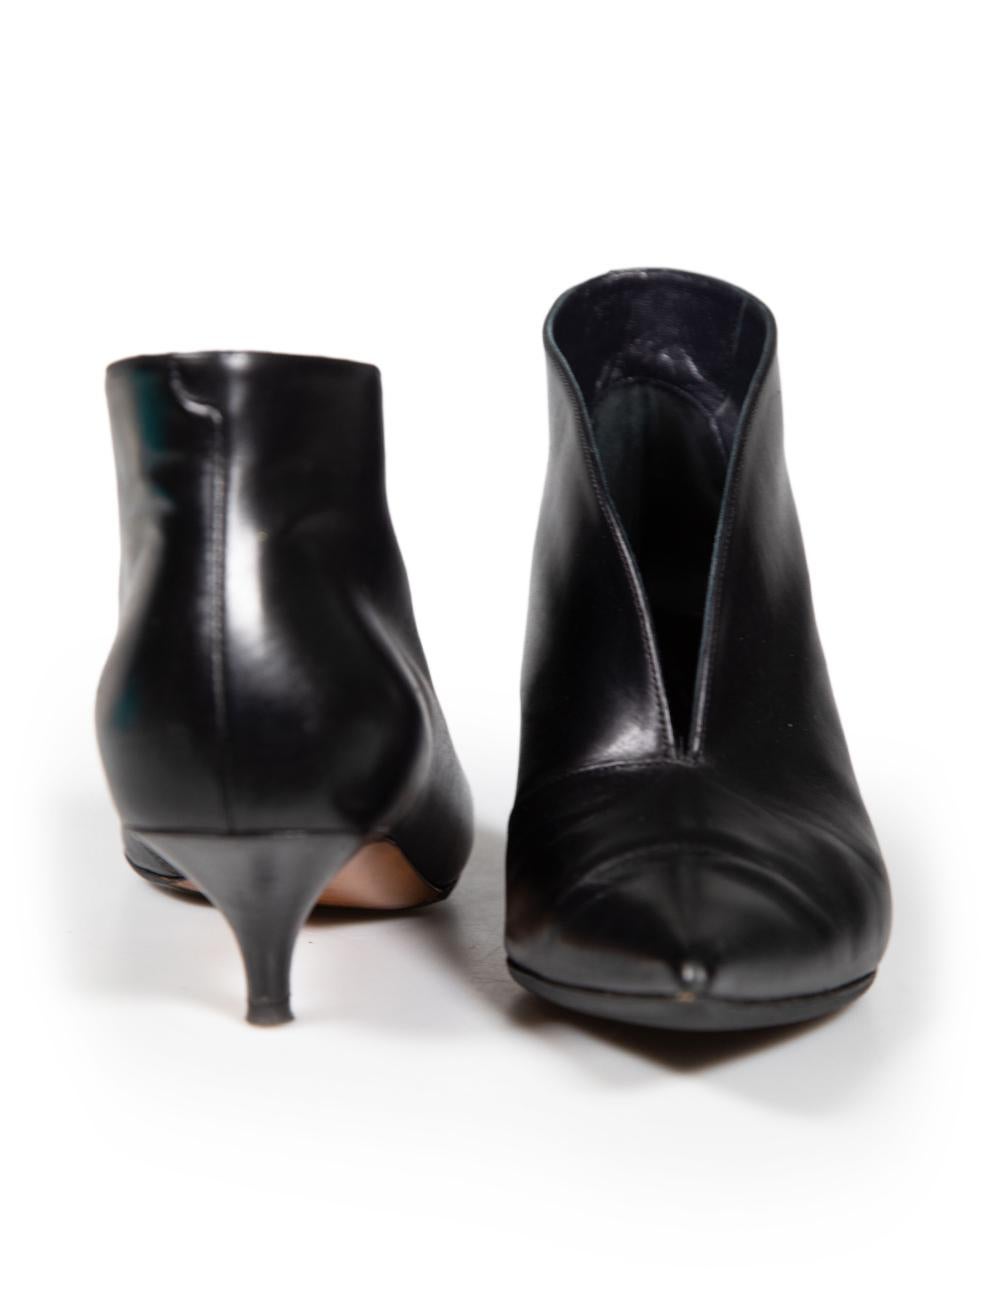 Céline Black Leather Pointed Toe Heels Size IT 36 In Good Condition For Sale In London, GB